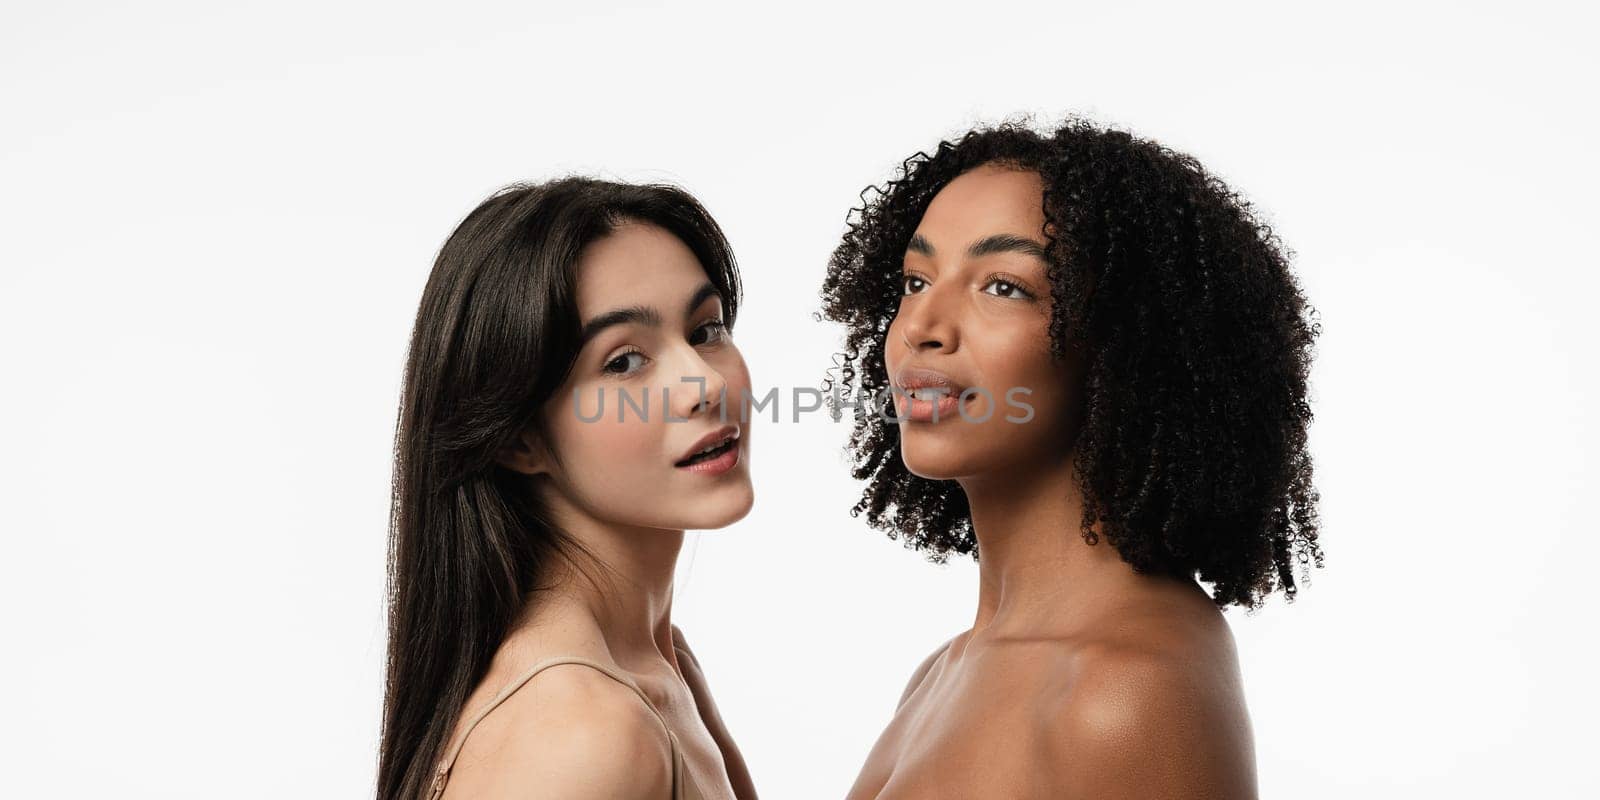 Female models of various ages celebrating their natural bodies in a studio. Two confident and joyful women smiling radiantly, having used cosmetics.